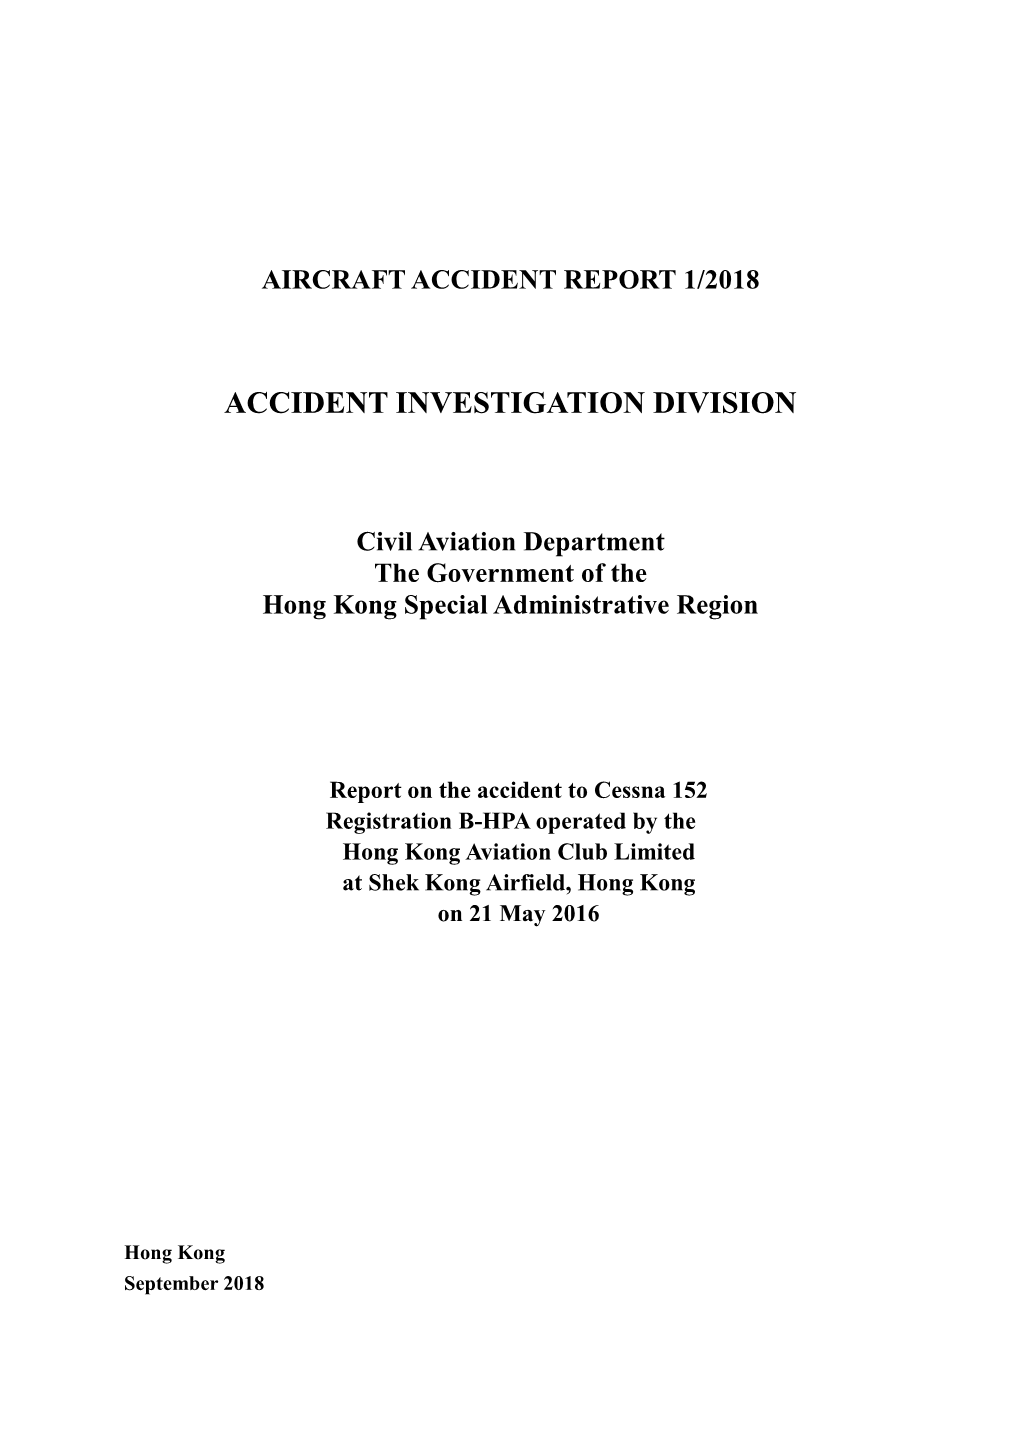 Final Report on Cessna 152 Registration B-HPA Aircraft Accident At